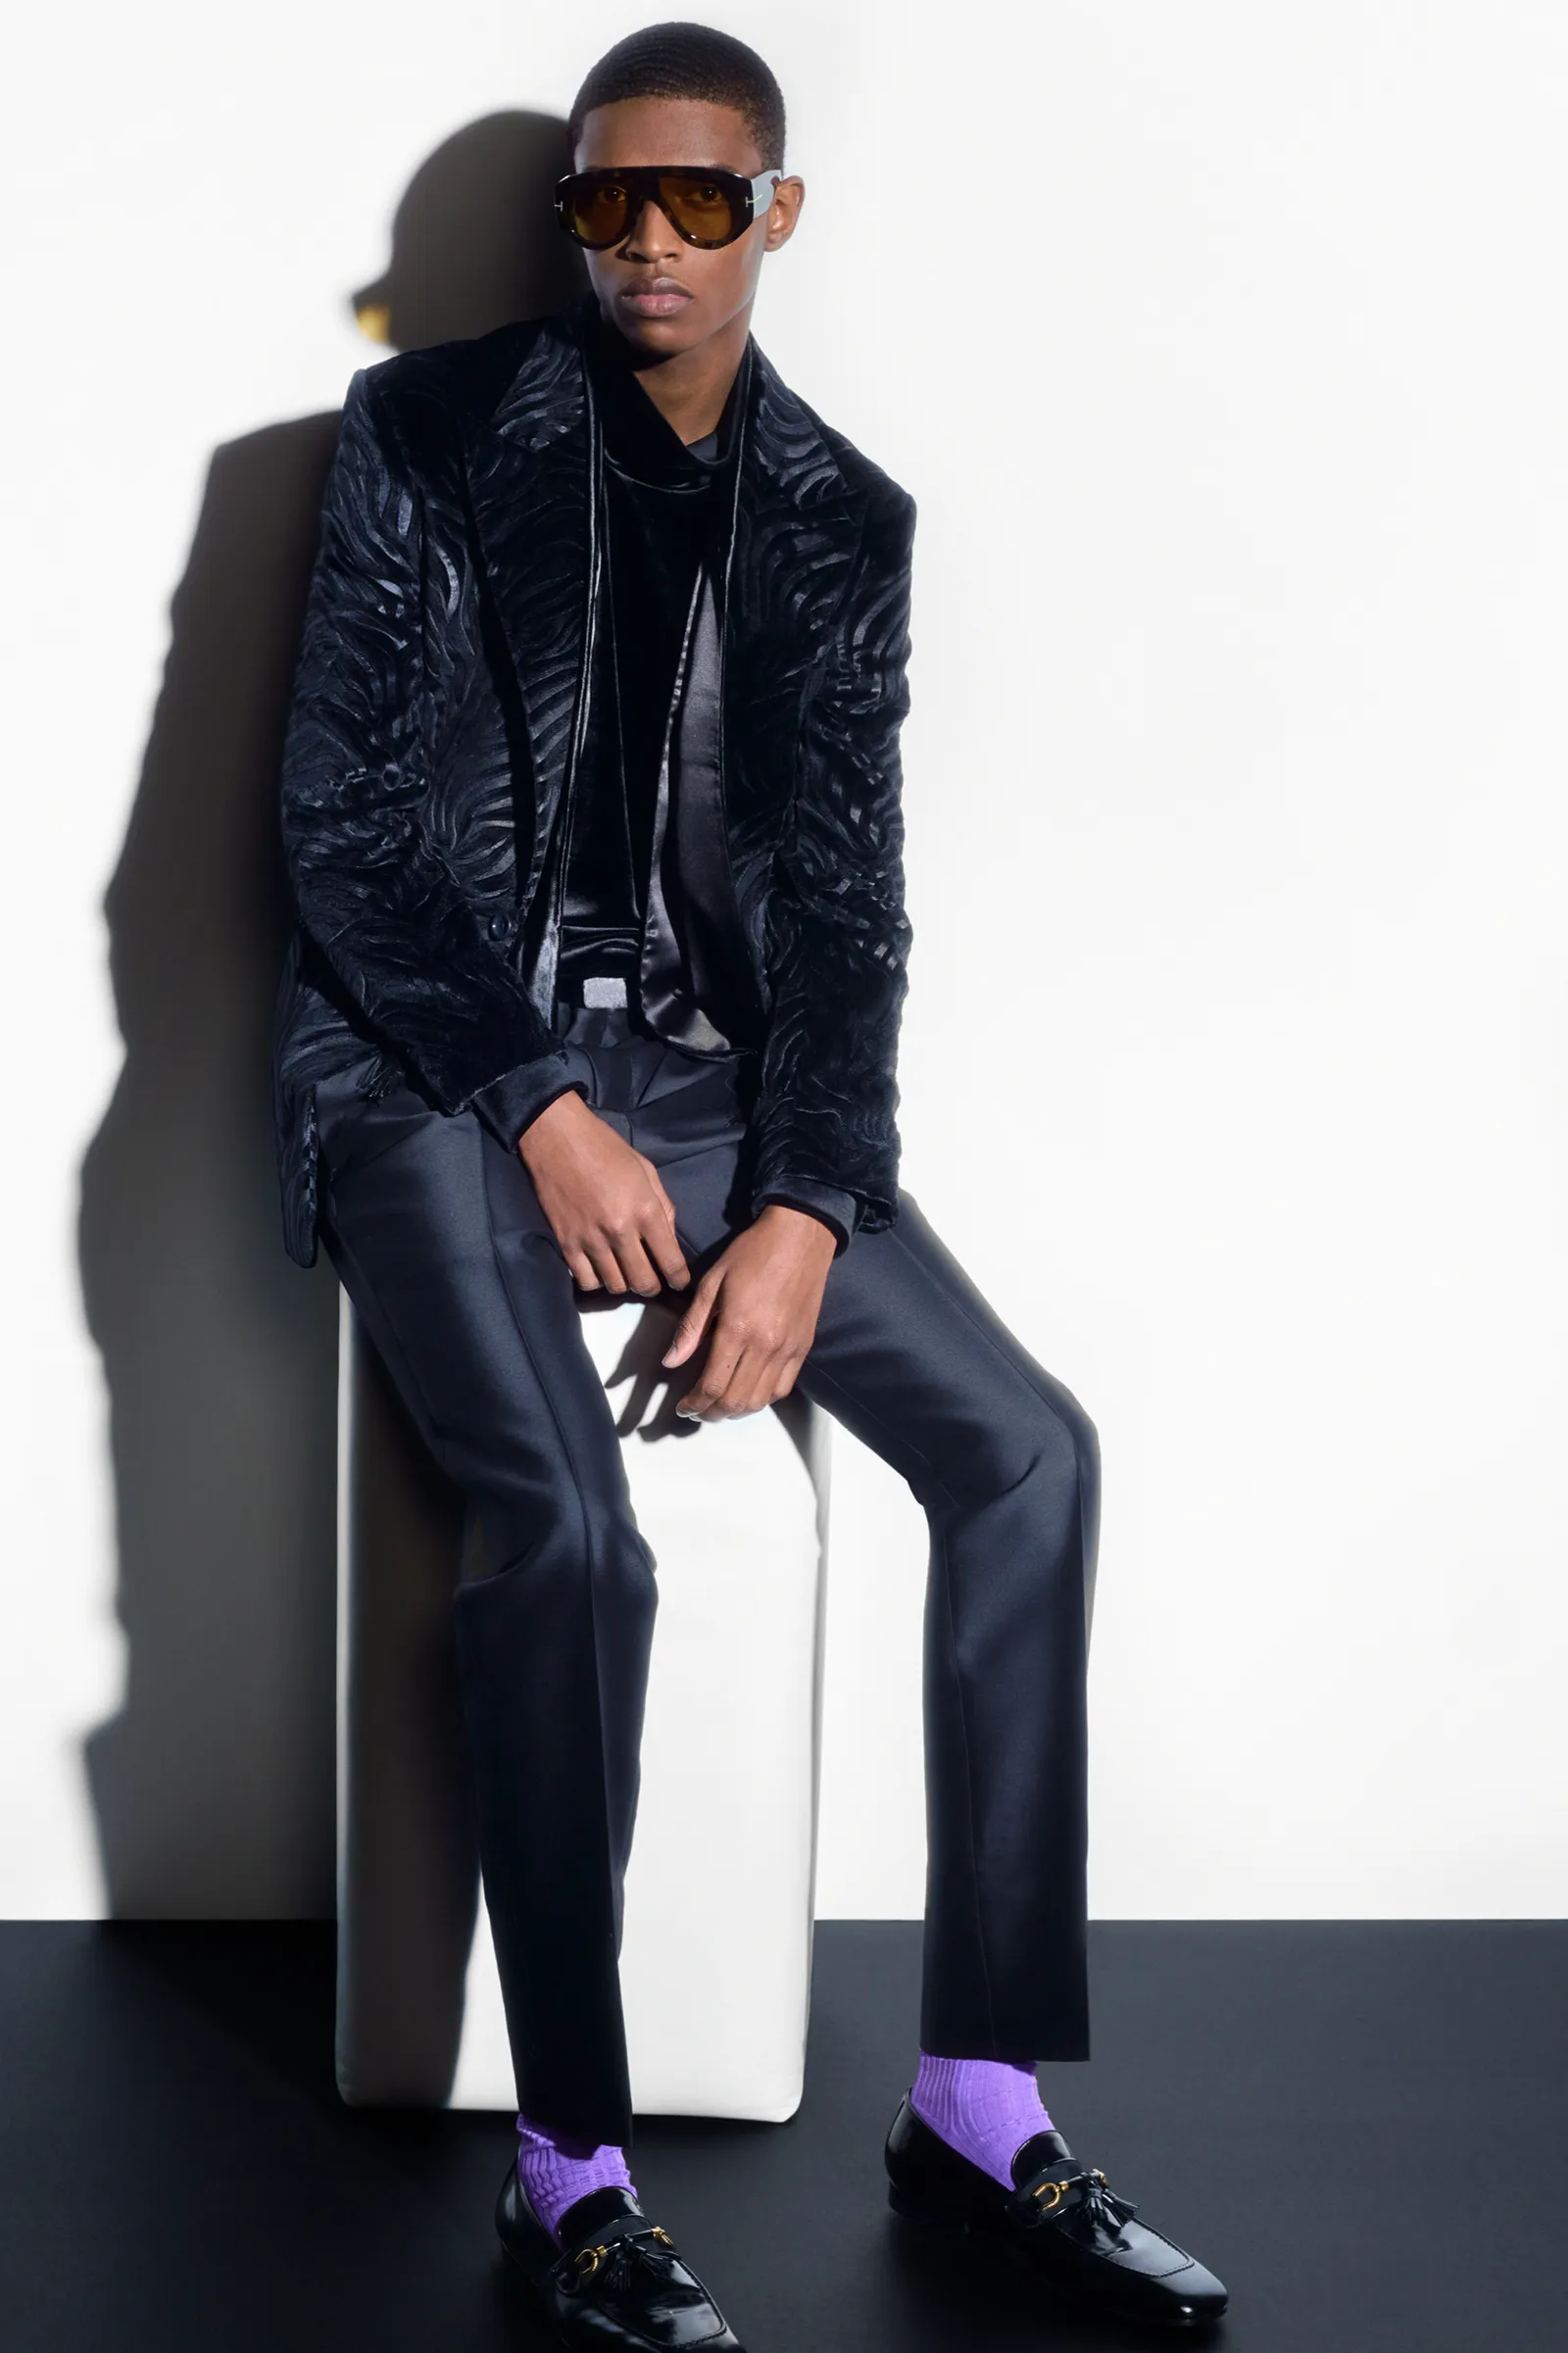 00041-tom-ford-fall-22-mens-nyc-credit-brand.png